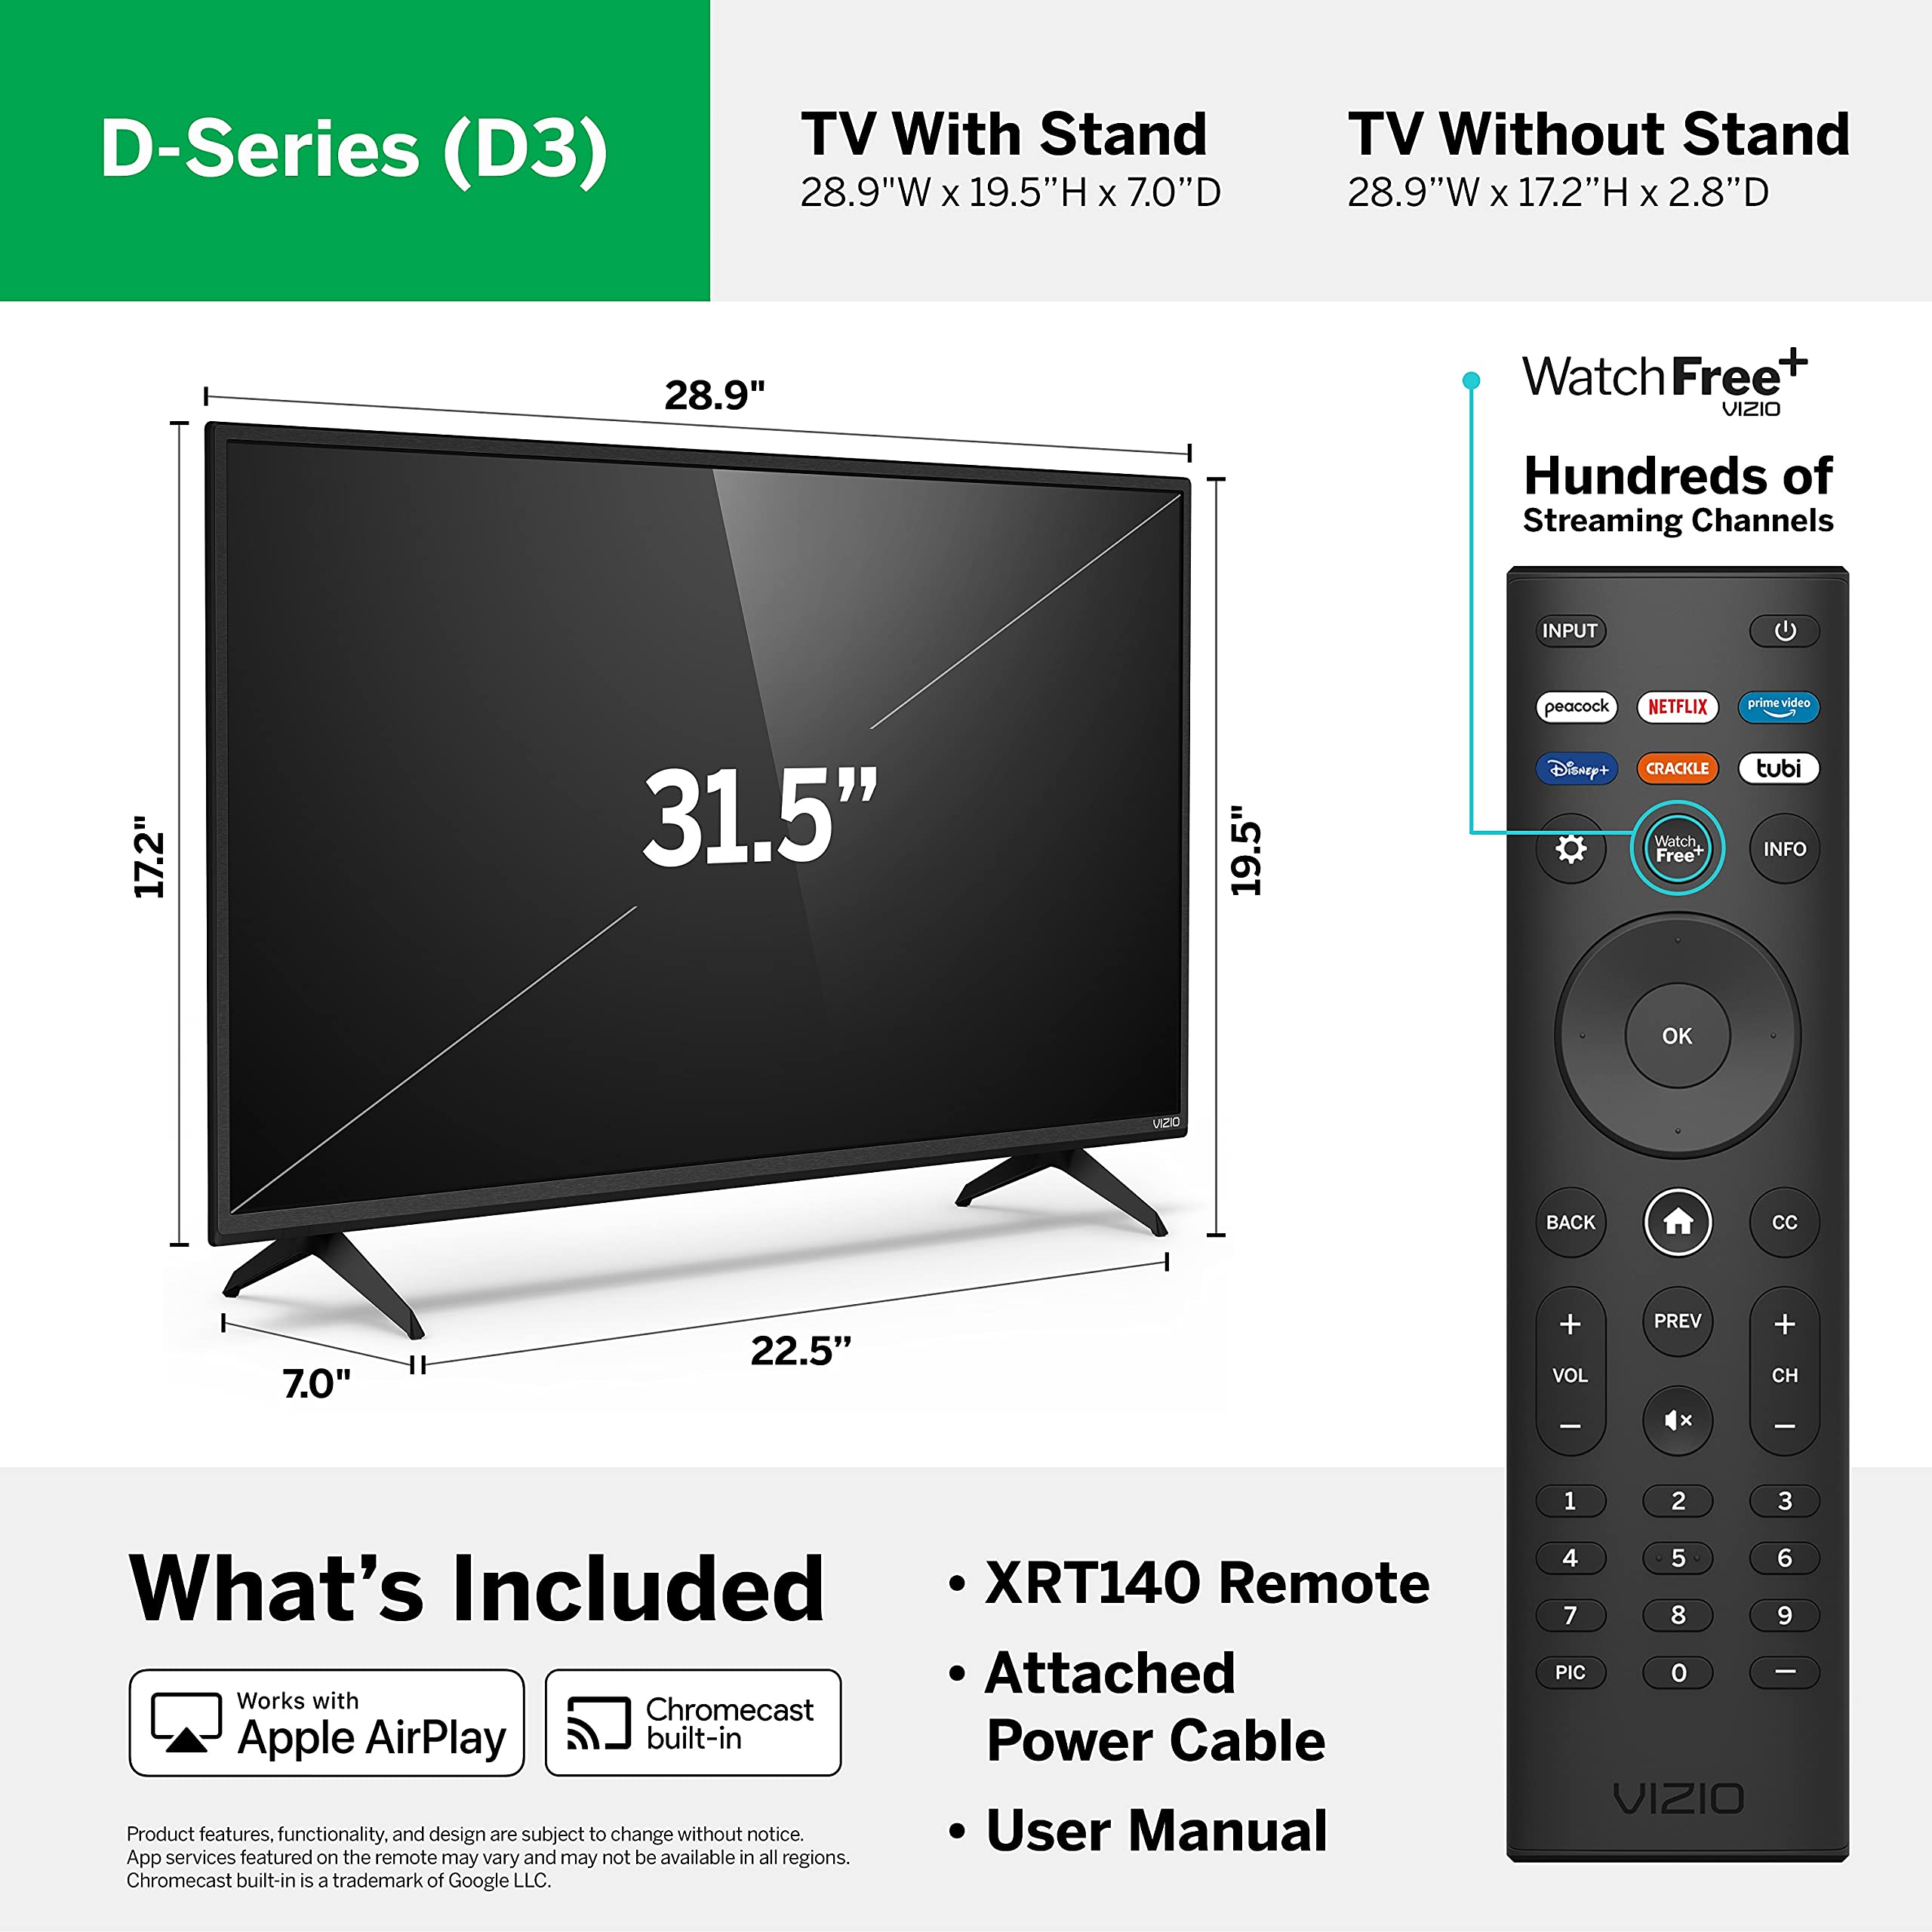 VIZIO 32-inch D-Series Full HD 720p Smart TV with Apple AirPlay and Chromecast Built-in, Alexa Compatibility, D32h-J09, 2022 Model